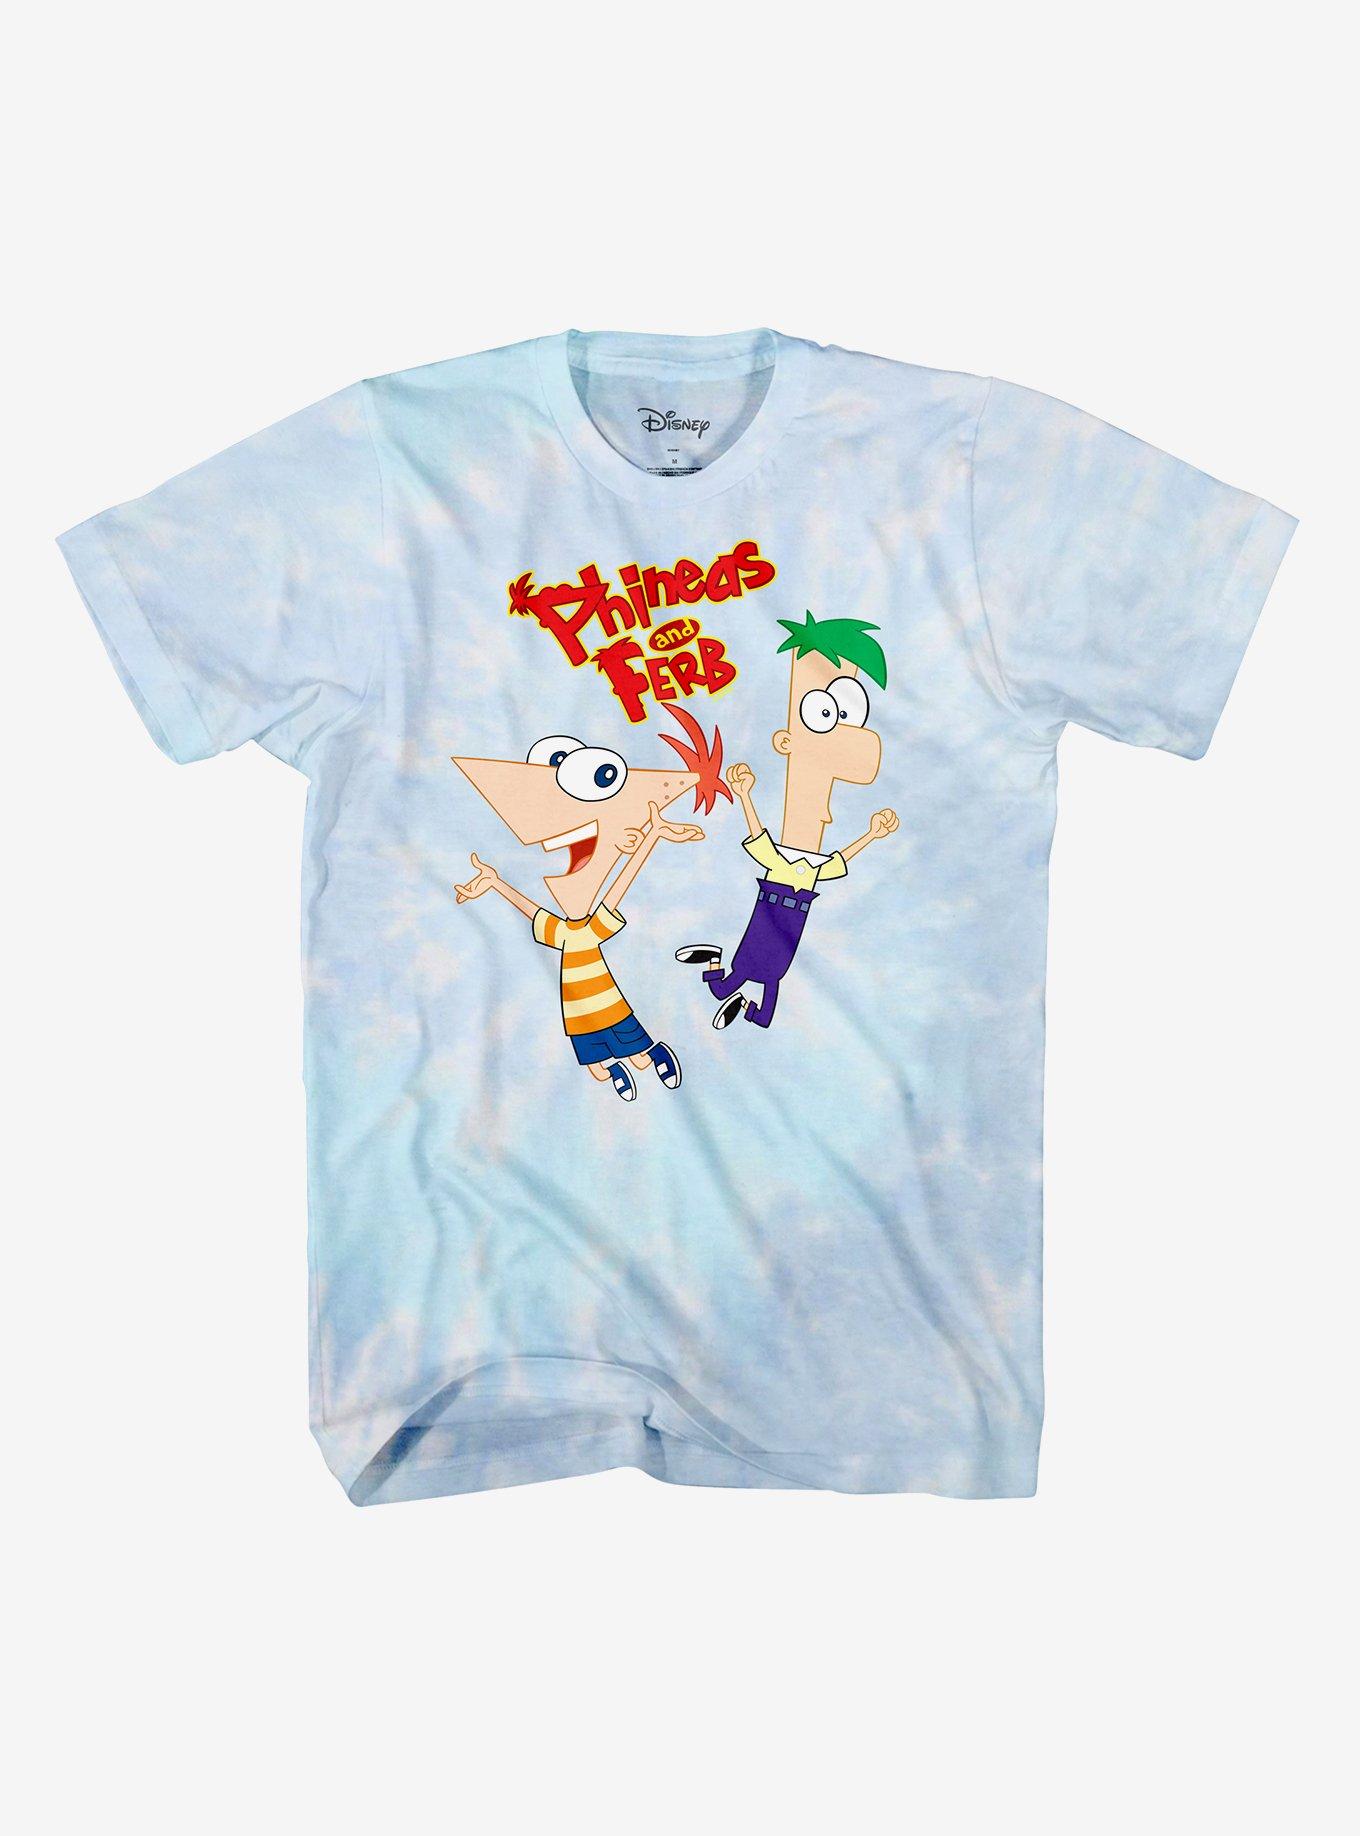 Disney Phineas And Ferb Jump Tie-Dye T-Shirt, MULTI, hi-res